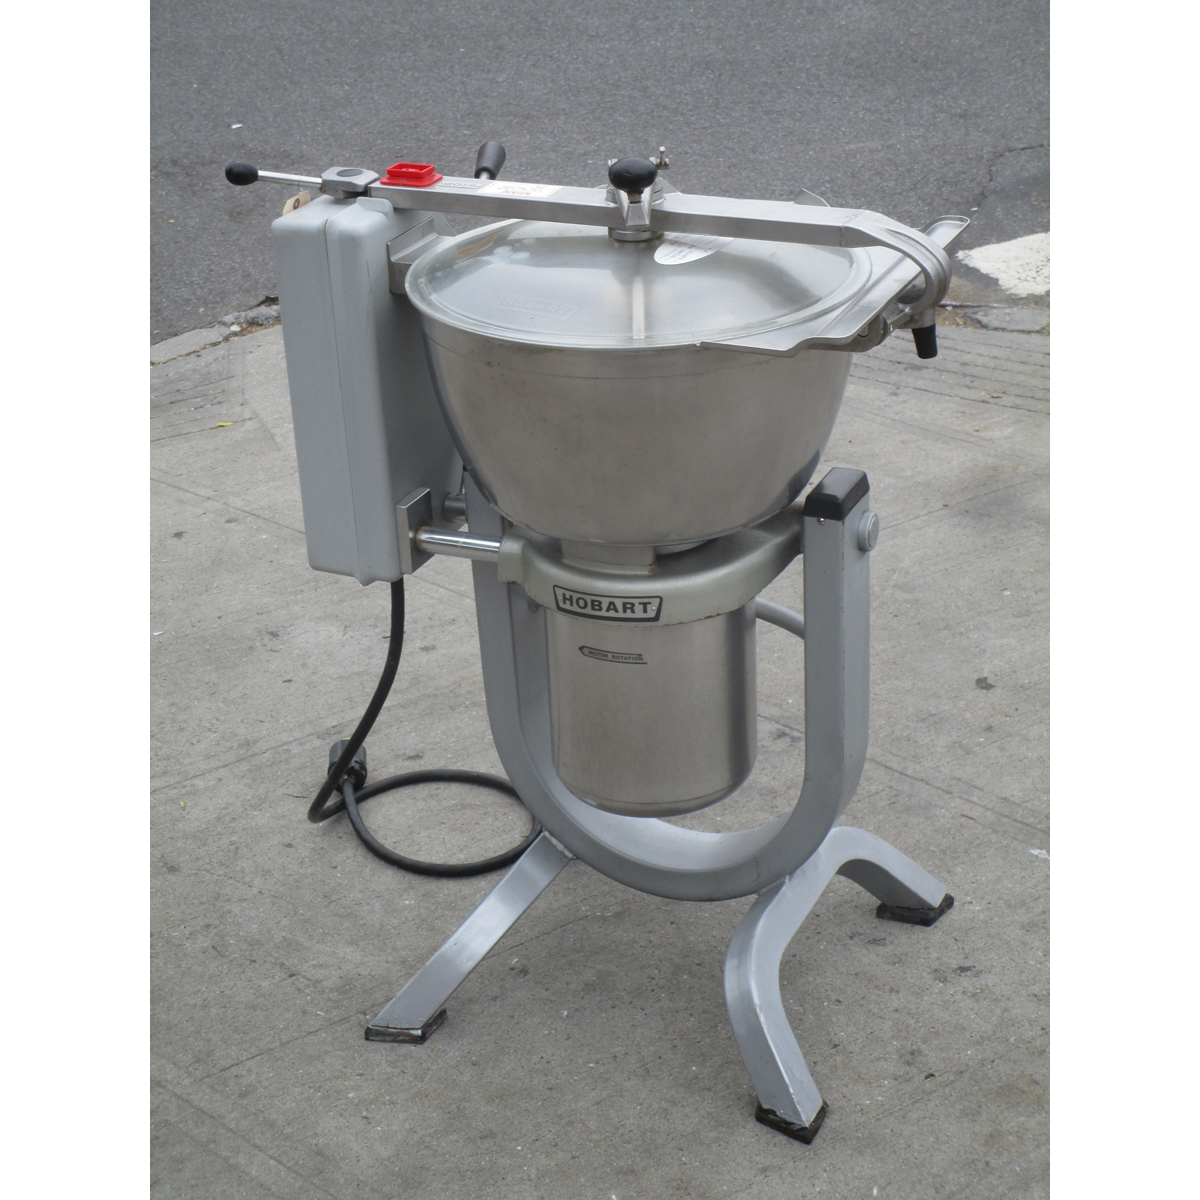 Hobart HCM-450 Vertical Cutter Mixer 45 Quart, Used Great Condition image 4